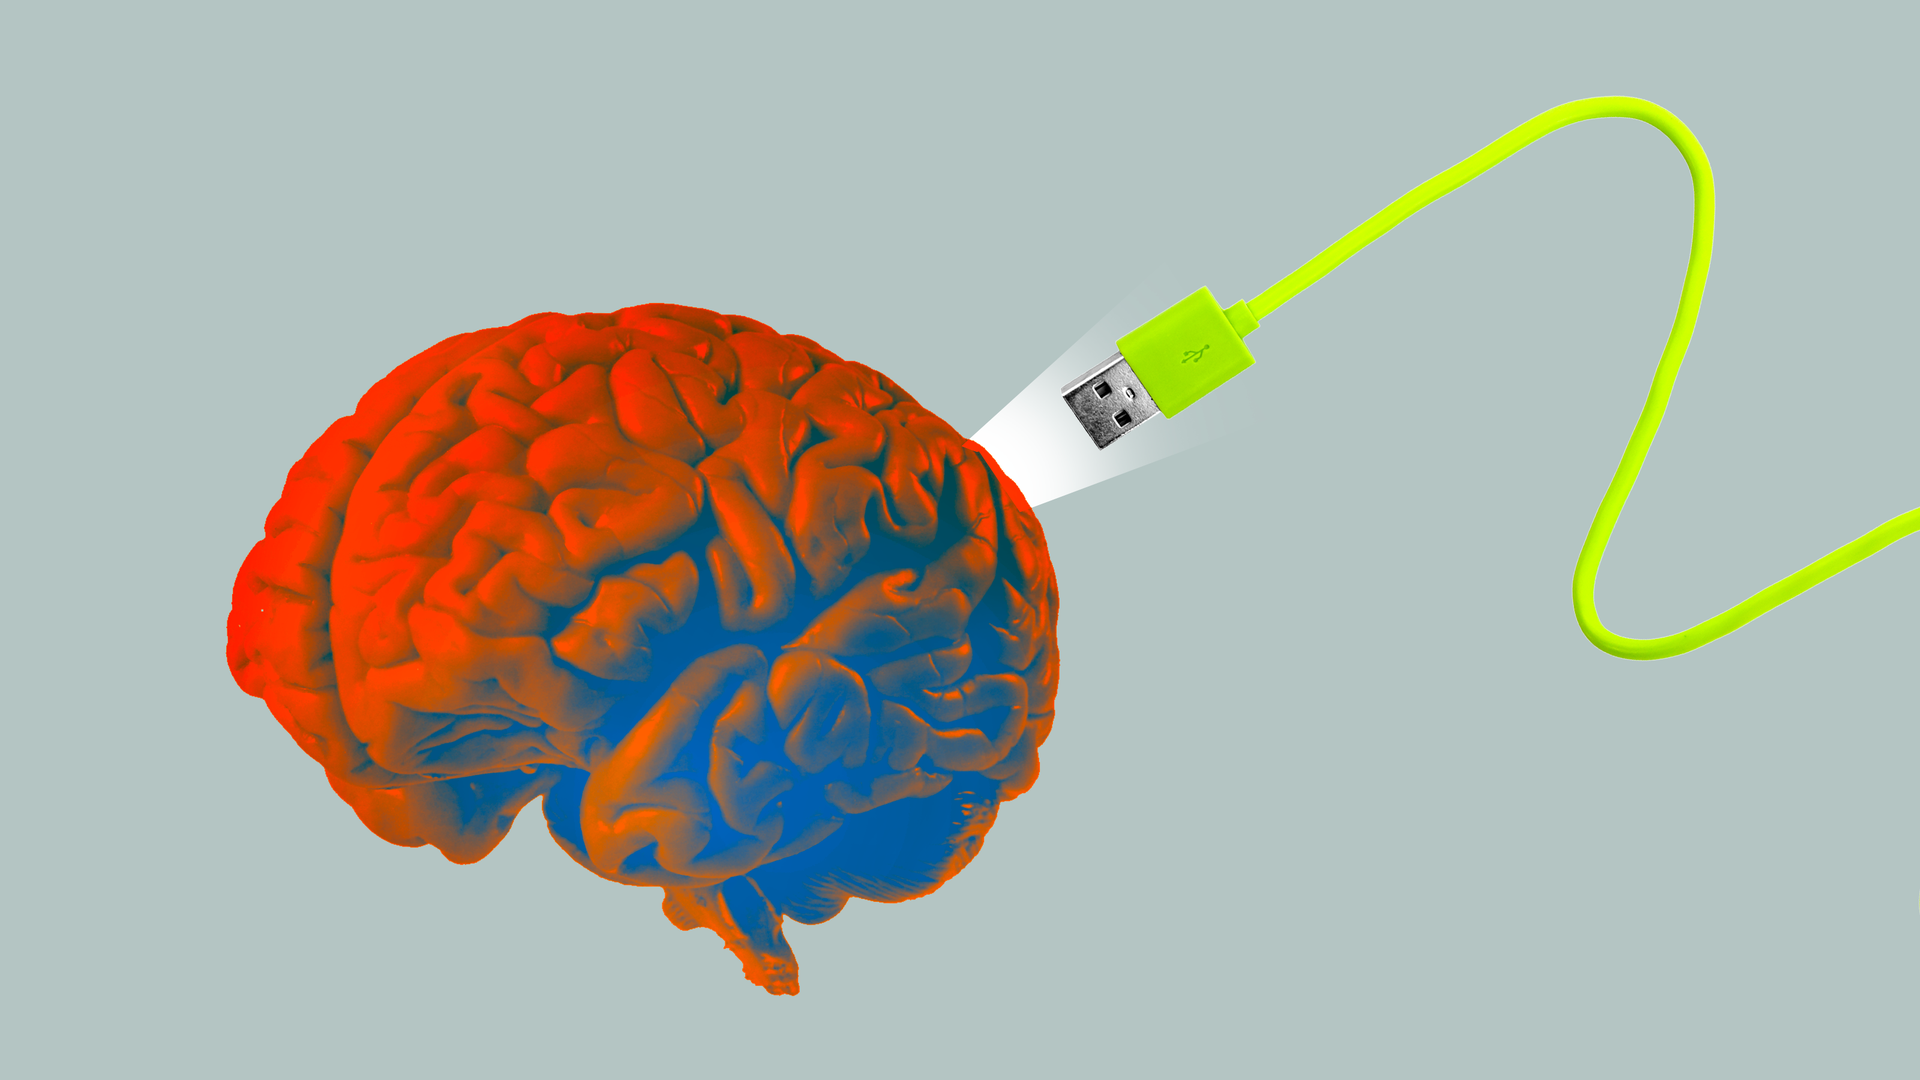 A usb cable plugging into a brain.